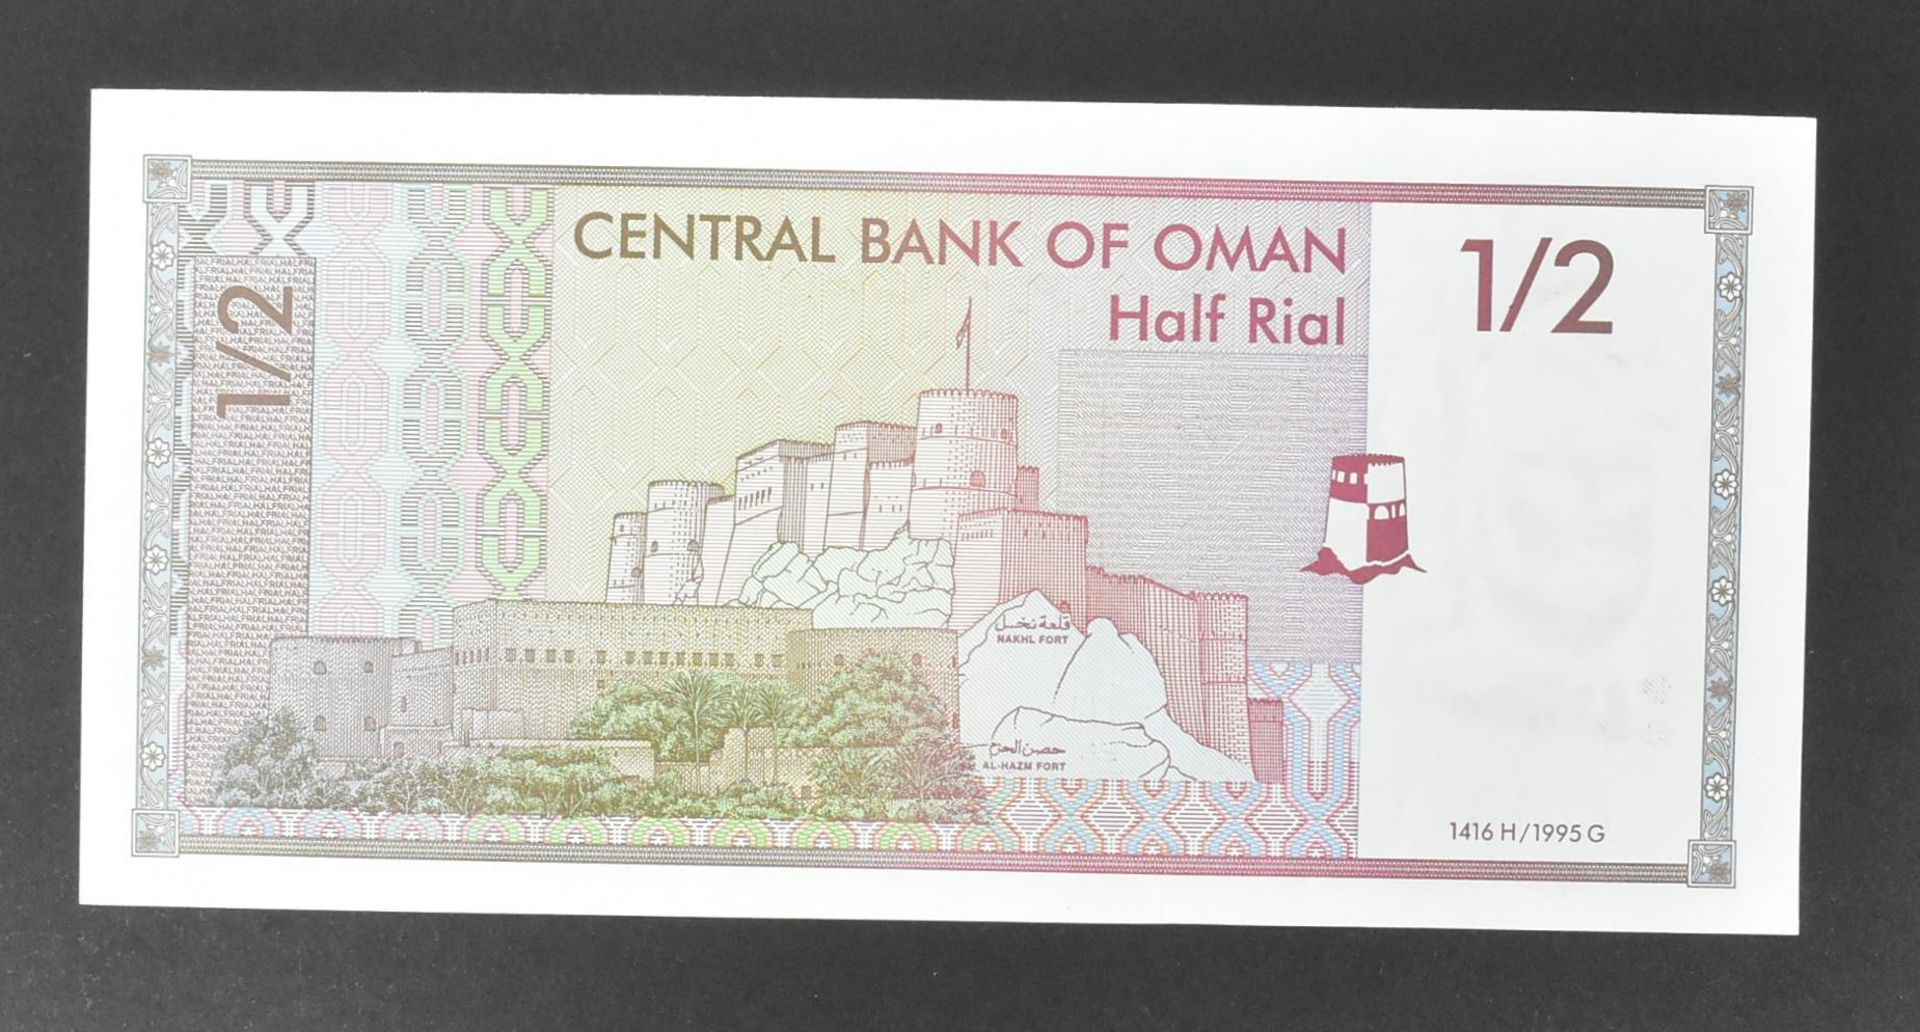 COLLECTION OF INTERNATIONAL UNCIRCULATED BANK NOTES - OMAN - Image 10 of 51